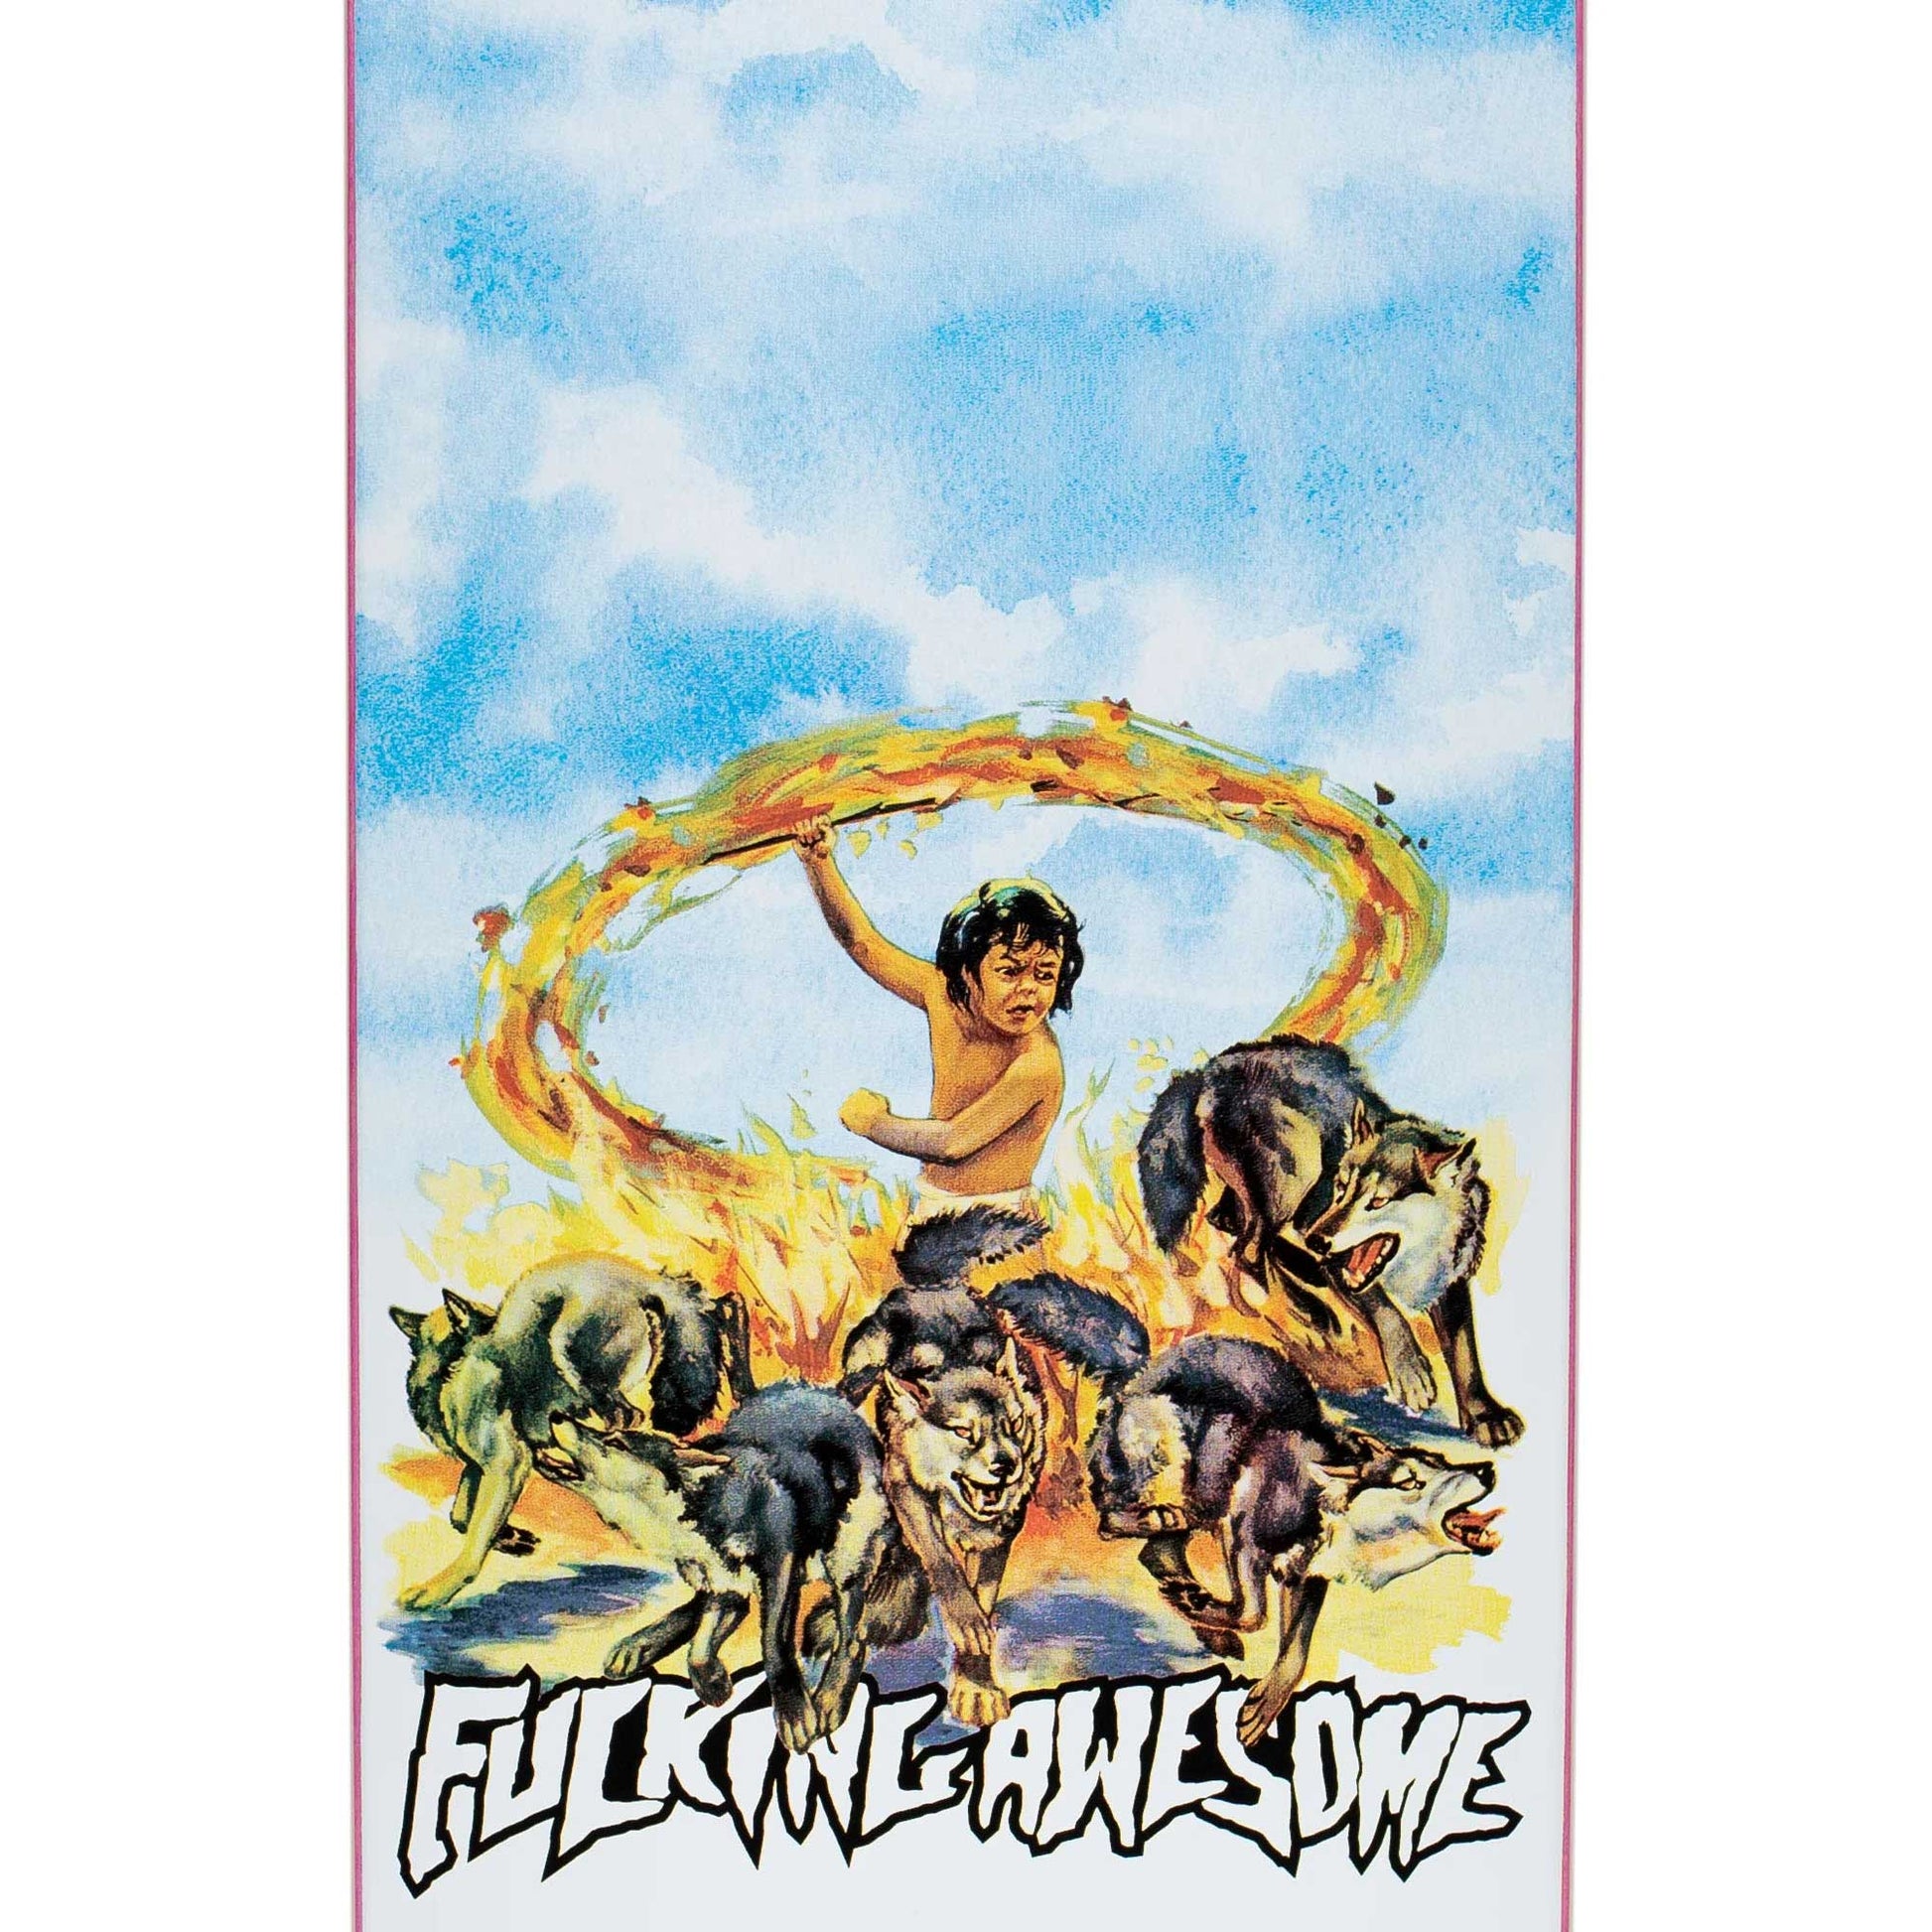 Fucking Awesome Louie Fire Child Deck (8.25") - Tiki Room Skateboards - 2